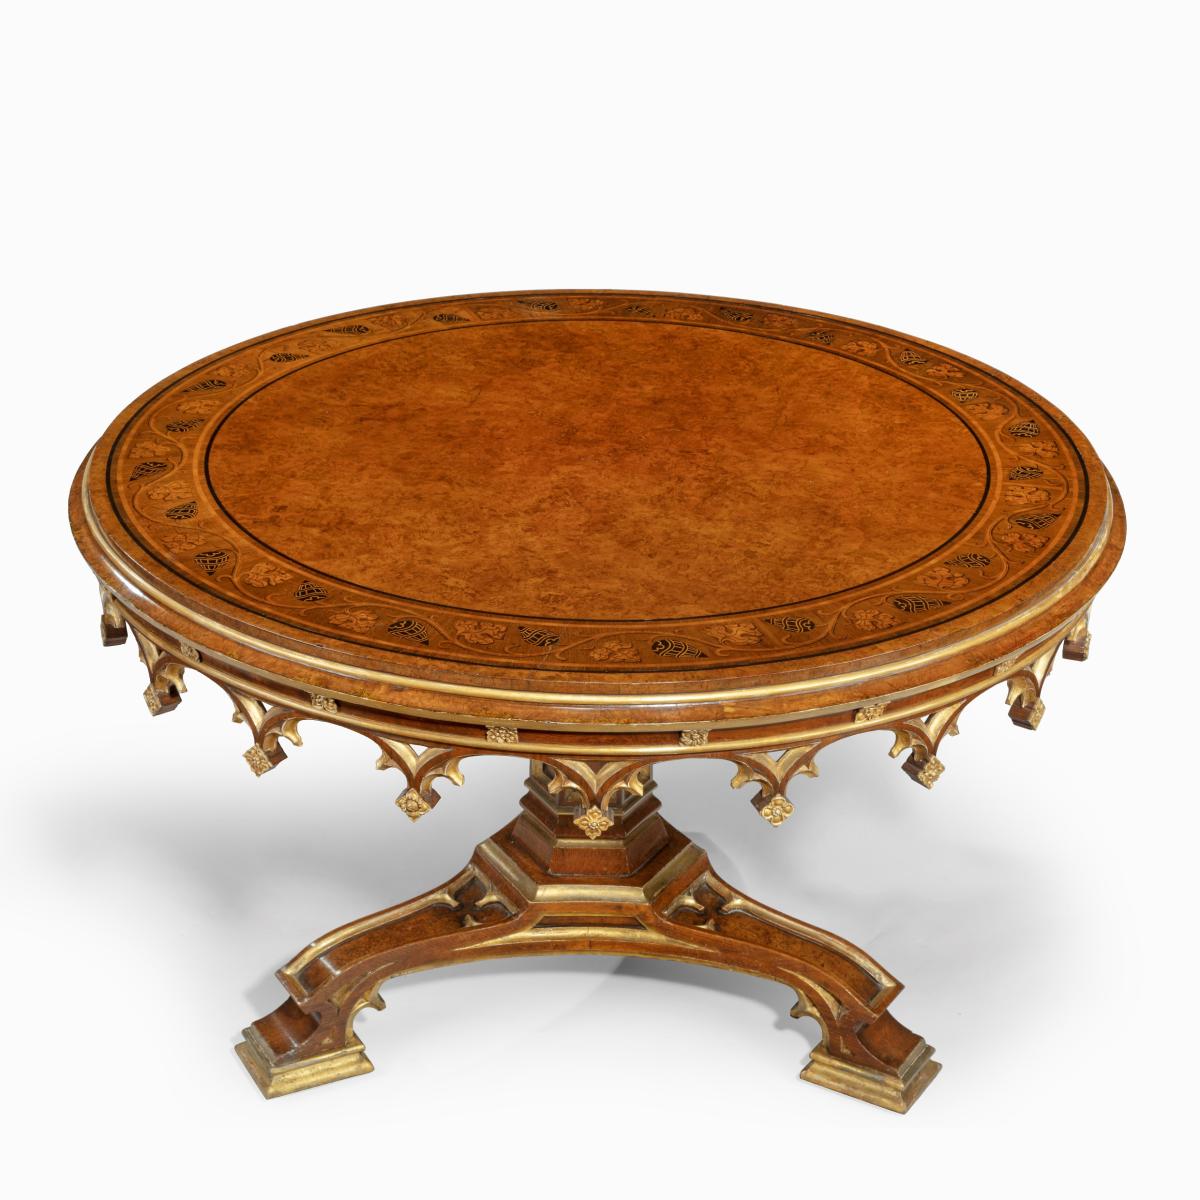 Pugin table commissioned by King George IV